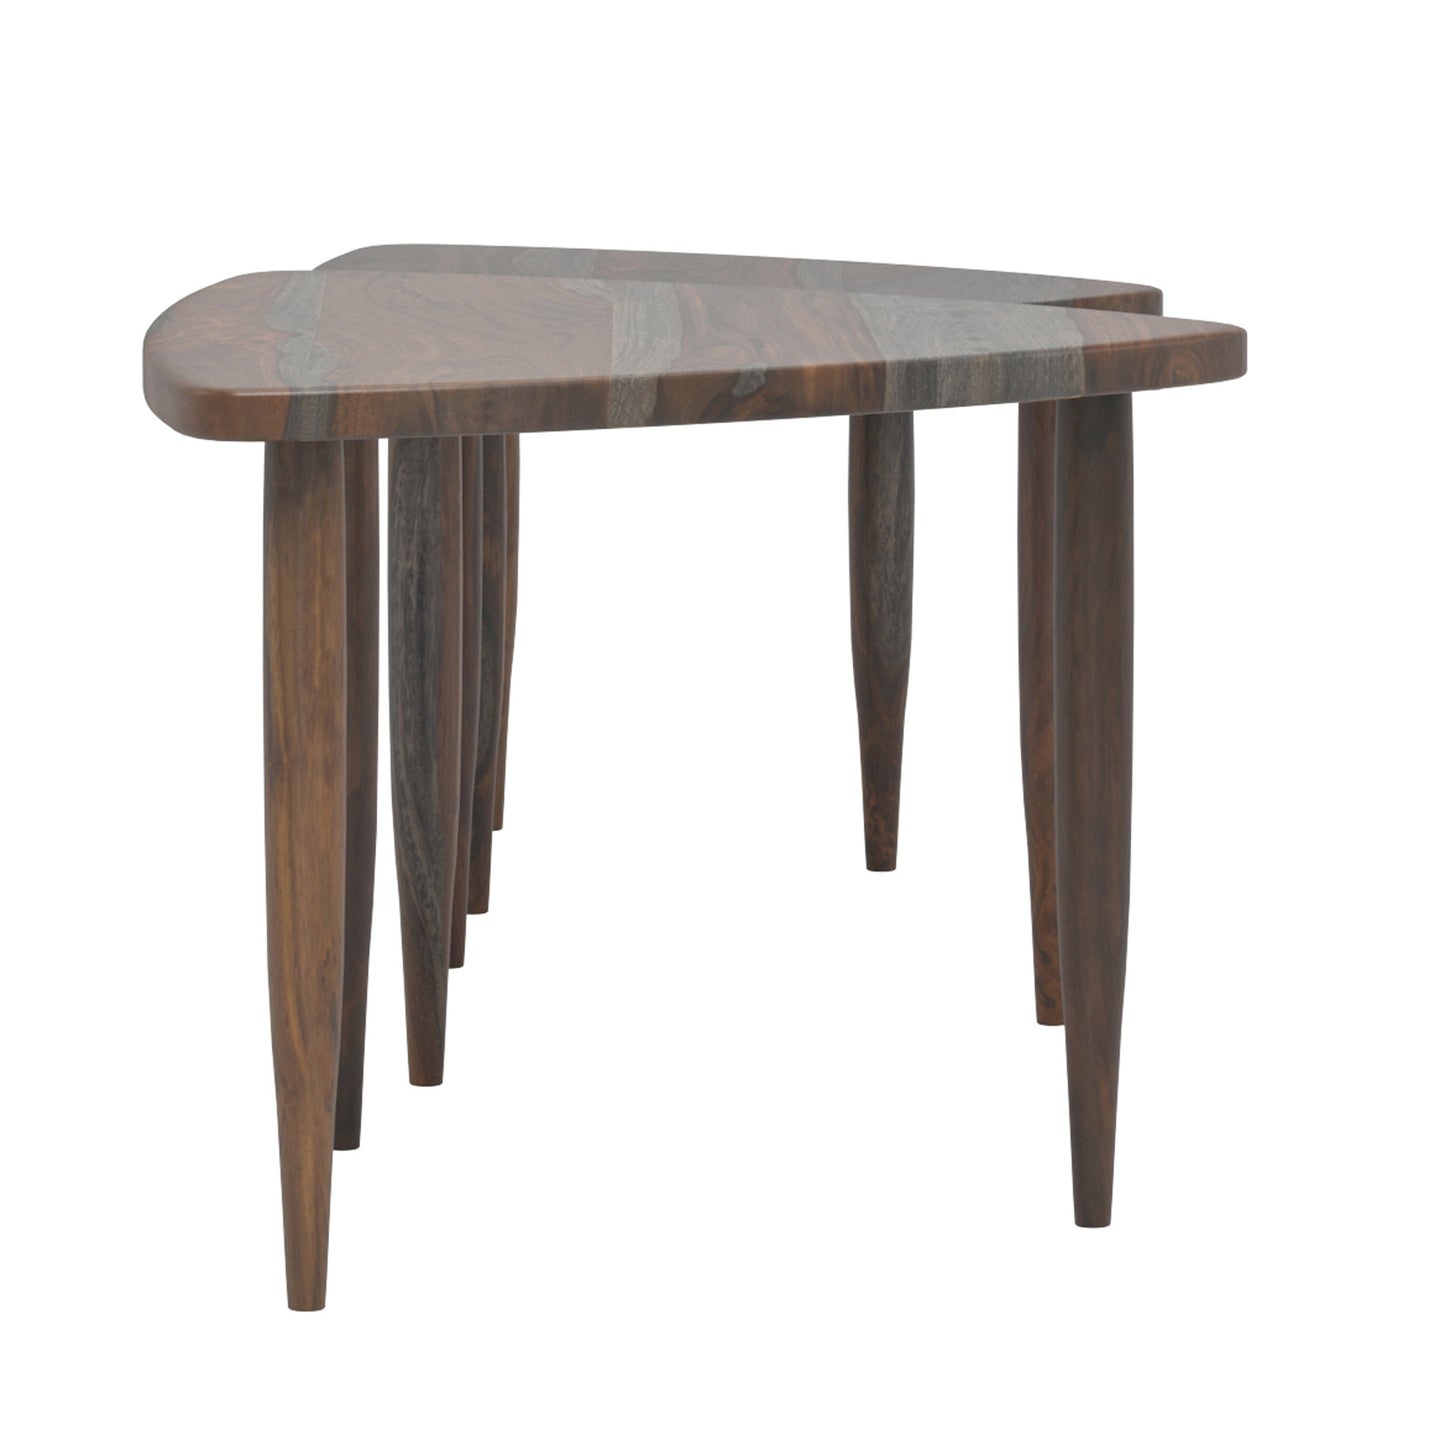 Royal Place Sheesham Wood Nesting Table Set In Grey For Living Room Furniture